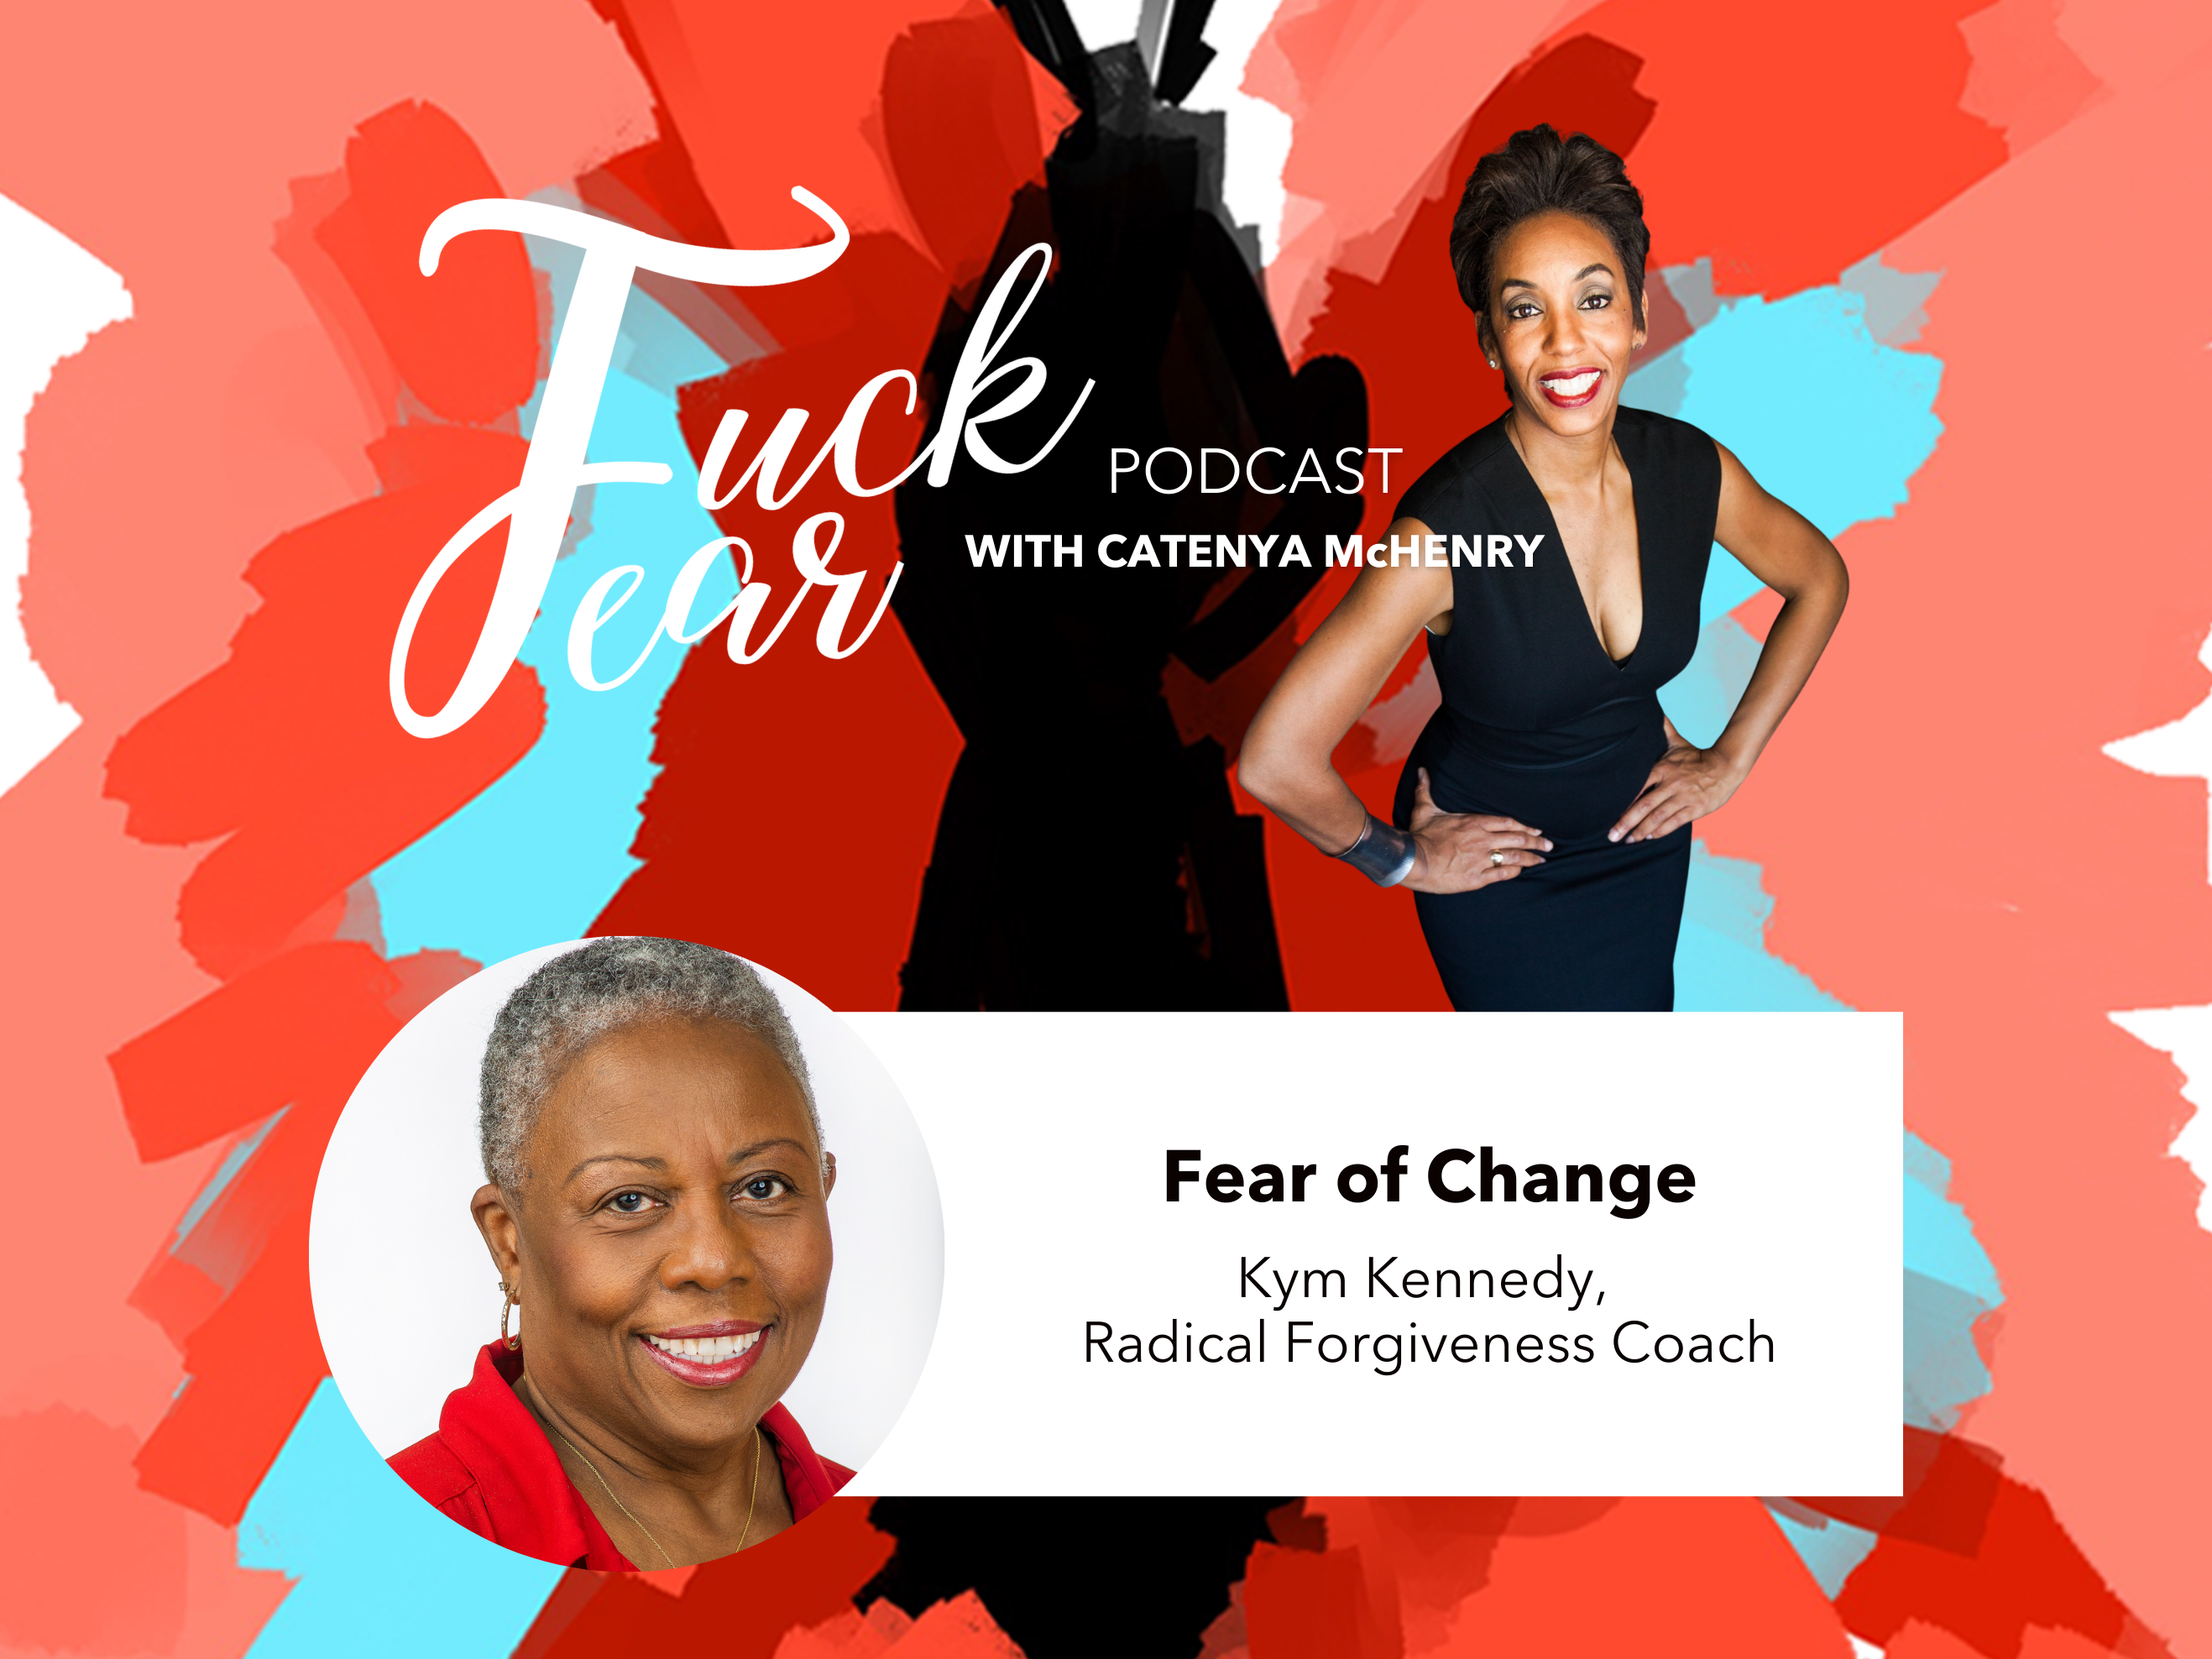 Host of the Fuck Fear podcast Catenya McHenry interviews radical forgiveness coach Kym Kennedy in an episode titled Fear of Change